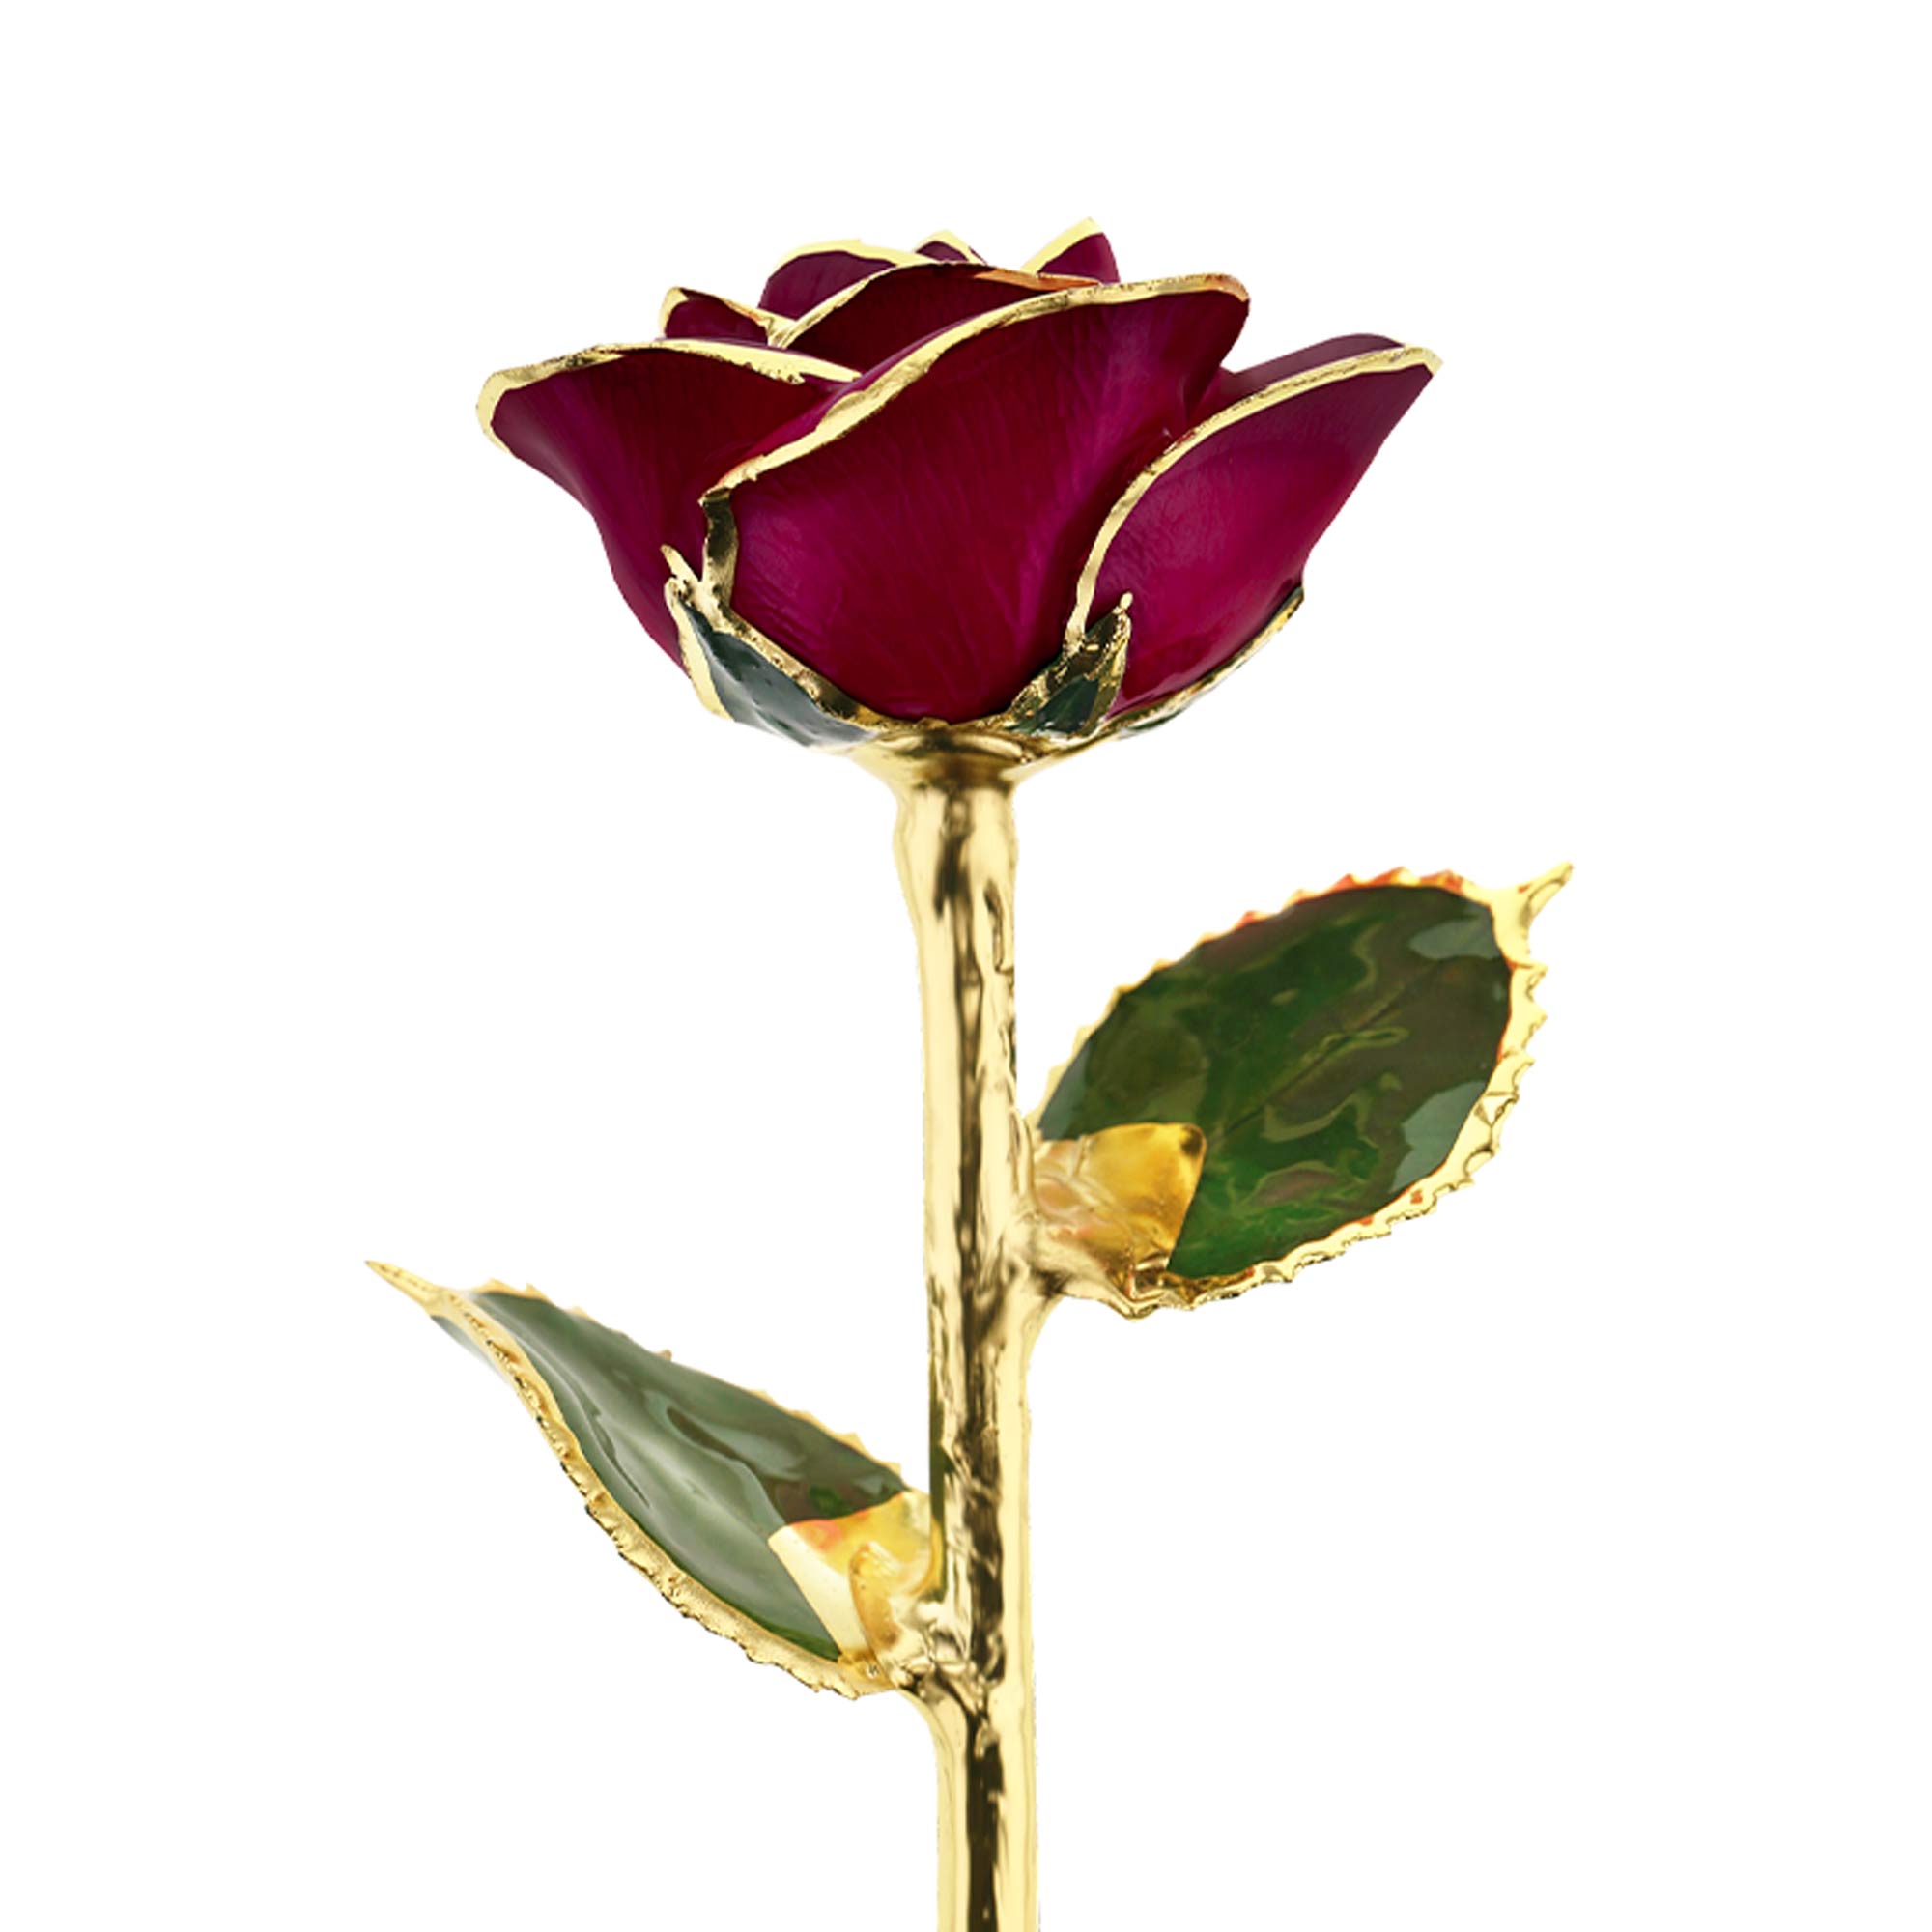 Red Wine 24kt Gold Dipped Rose